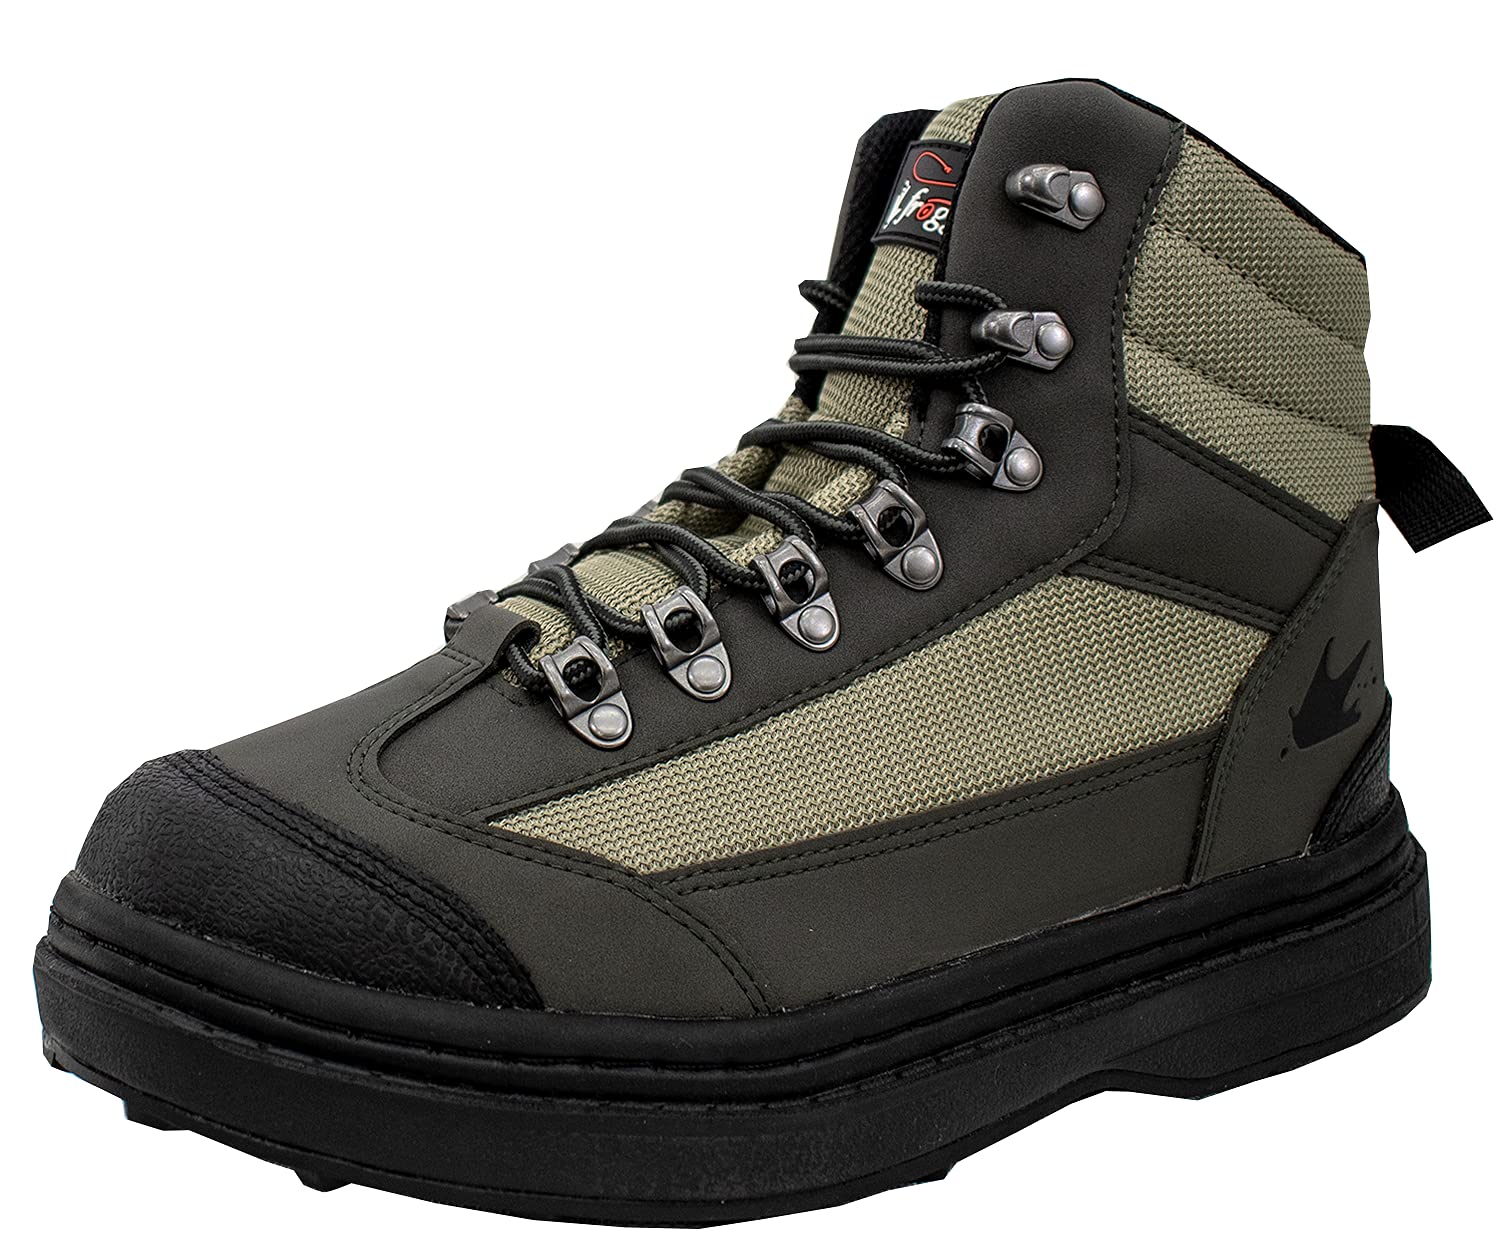 Frogg Toggs Men’s Hellbender Fishing Wading Boot